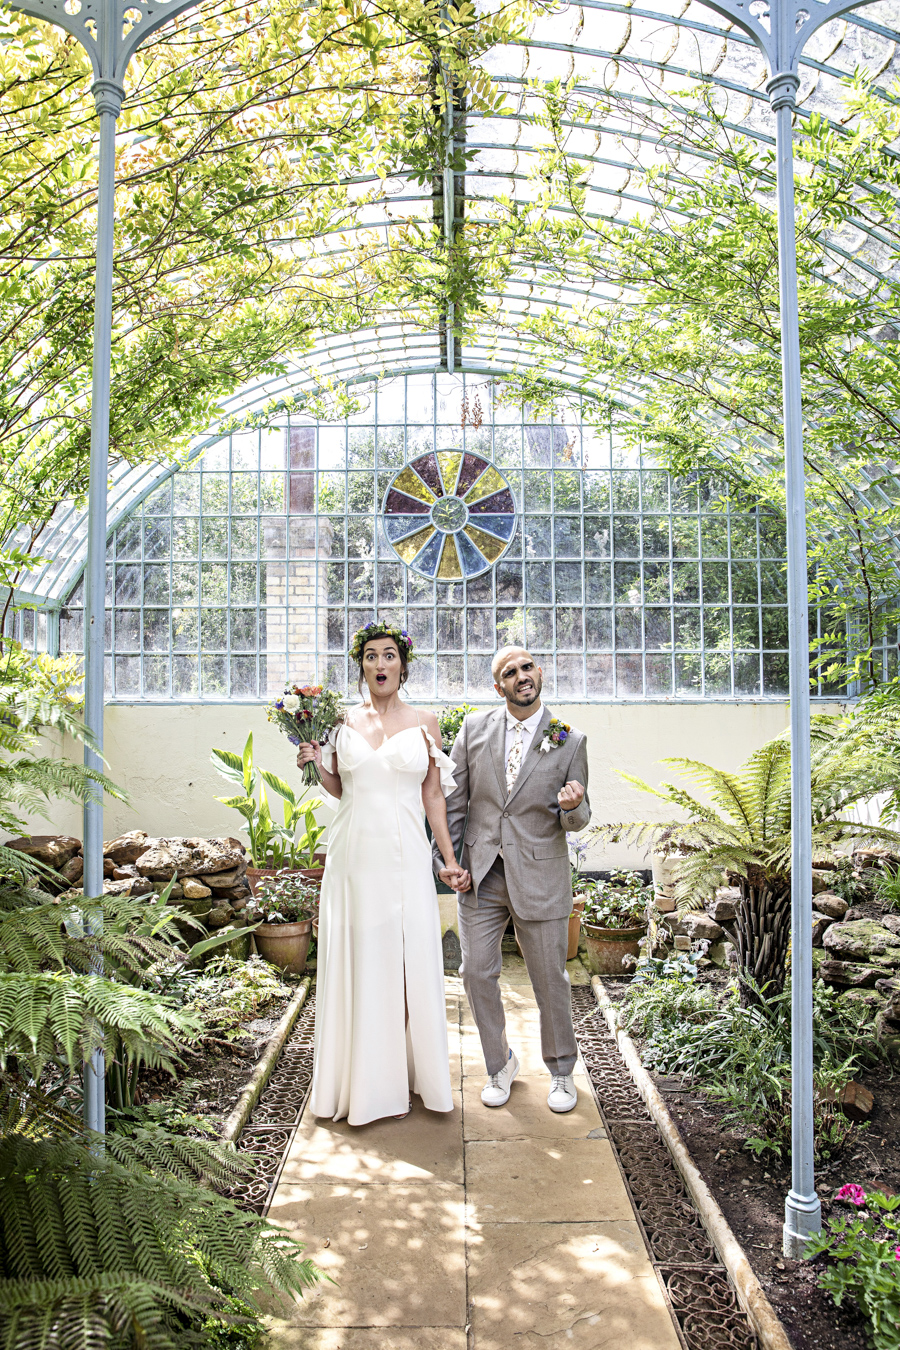 Andreia and Antonio's relaxed and fun wedding at Shuttleworth Swiss Garden with Lorna Newman Wedding Photography (36)